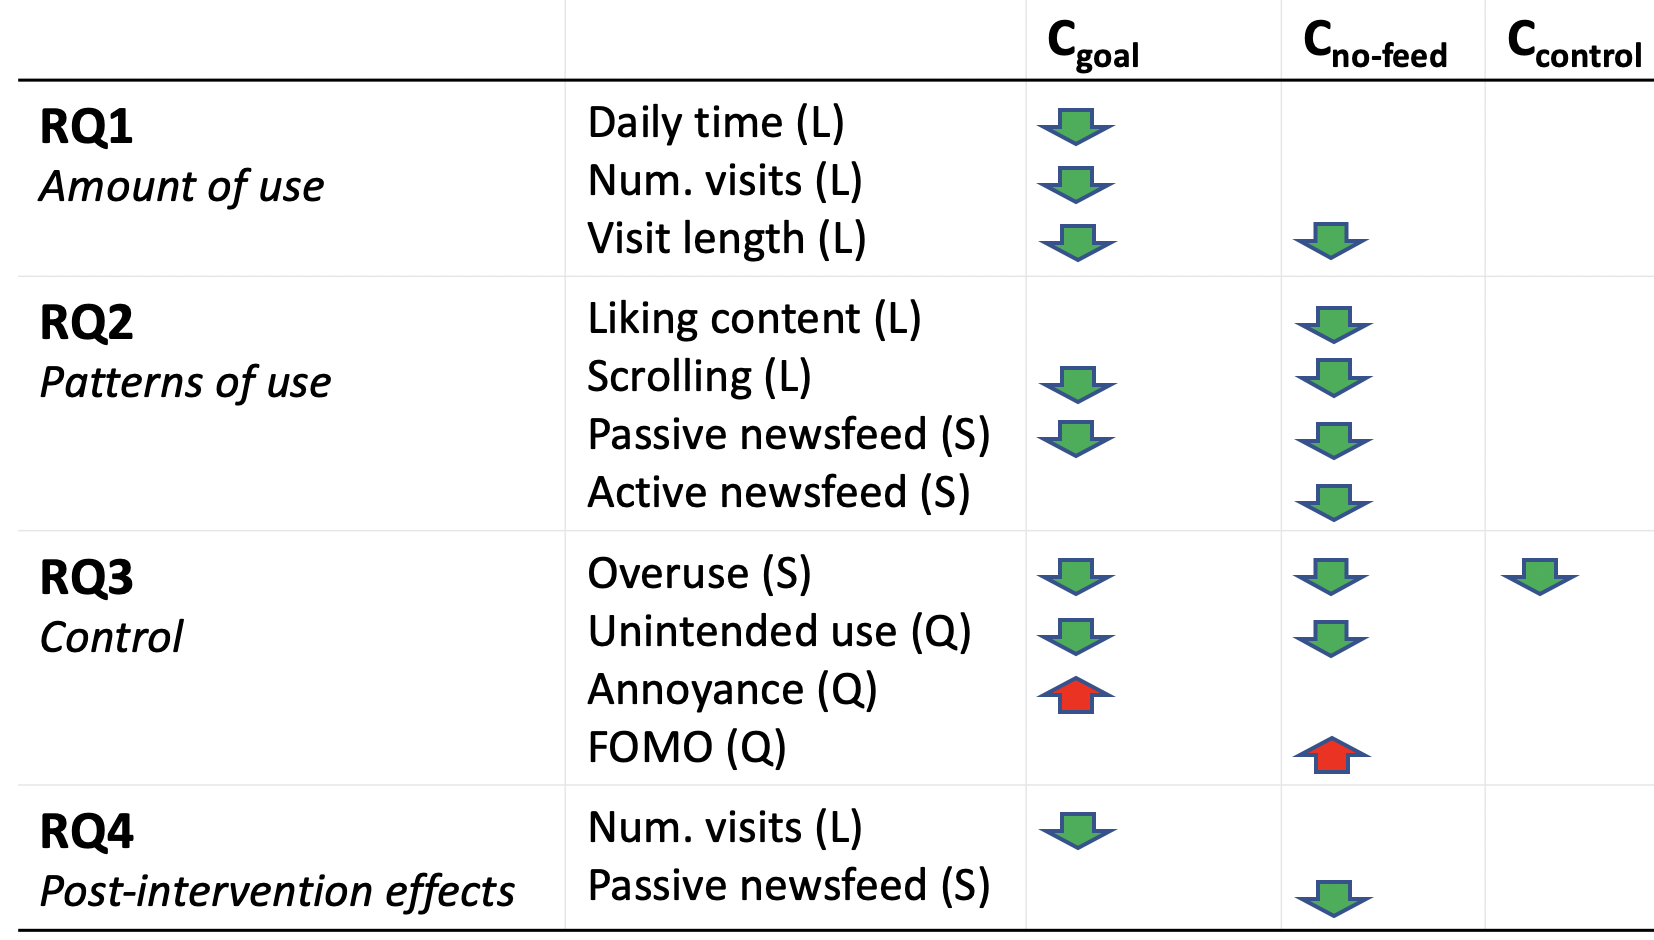 Summary of RQ1-4 findings. Arrows indicate associated increases and decreases - blank fields indicate no change. 'L' = logged usage data, 'S' = quantitative survey data, 'Q' = qualitative data from surveys and interviews.